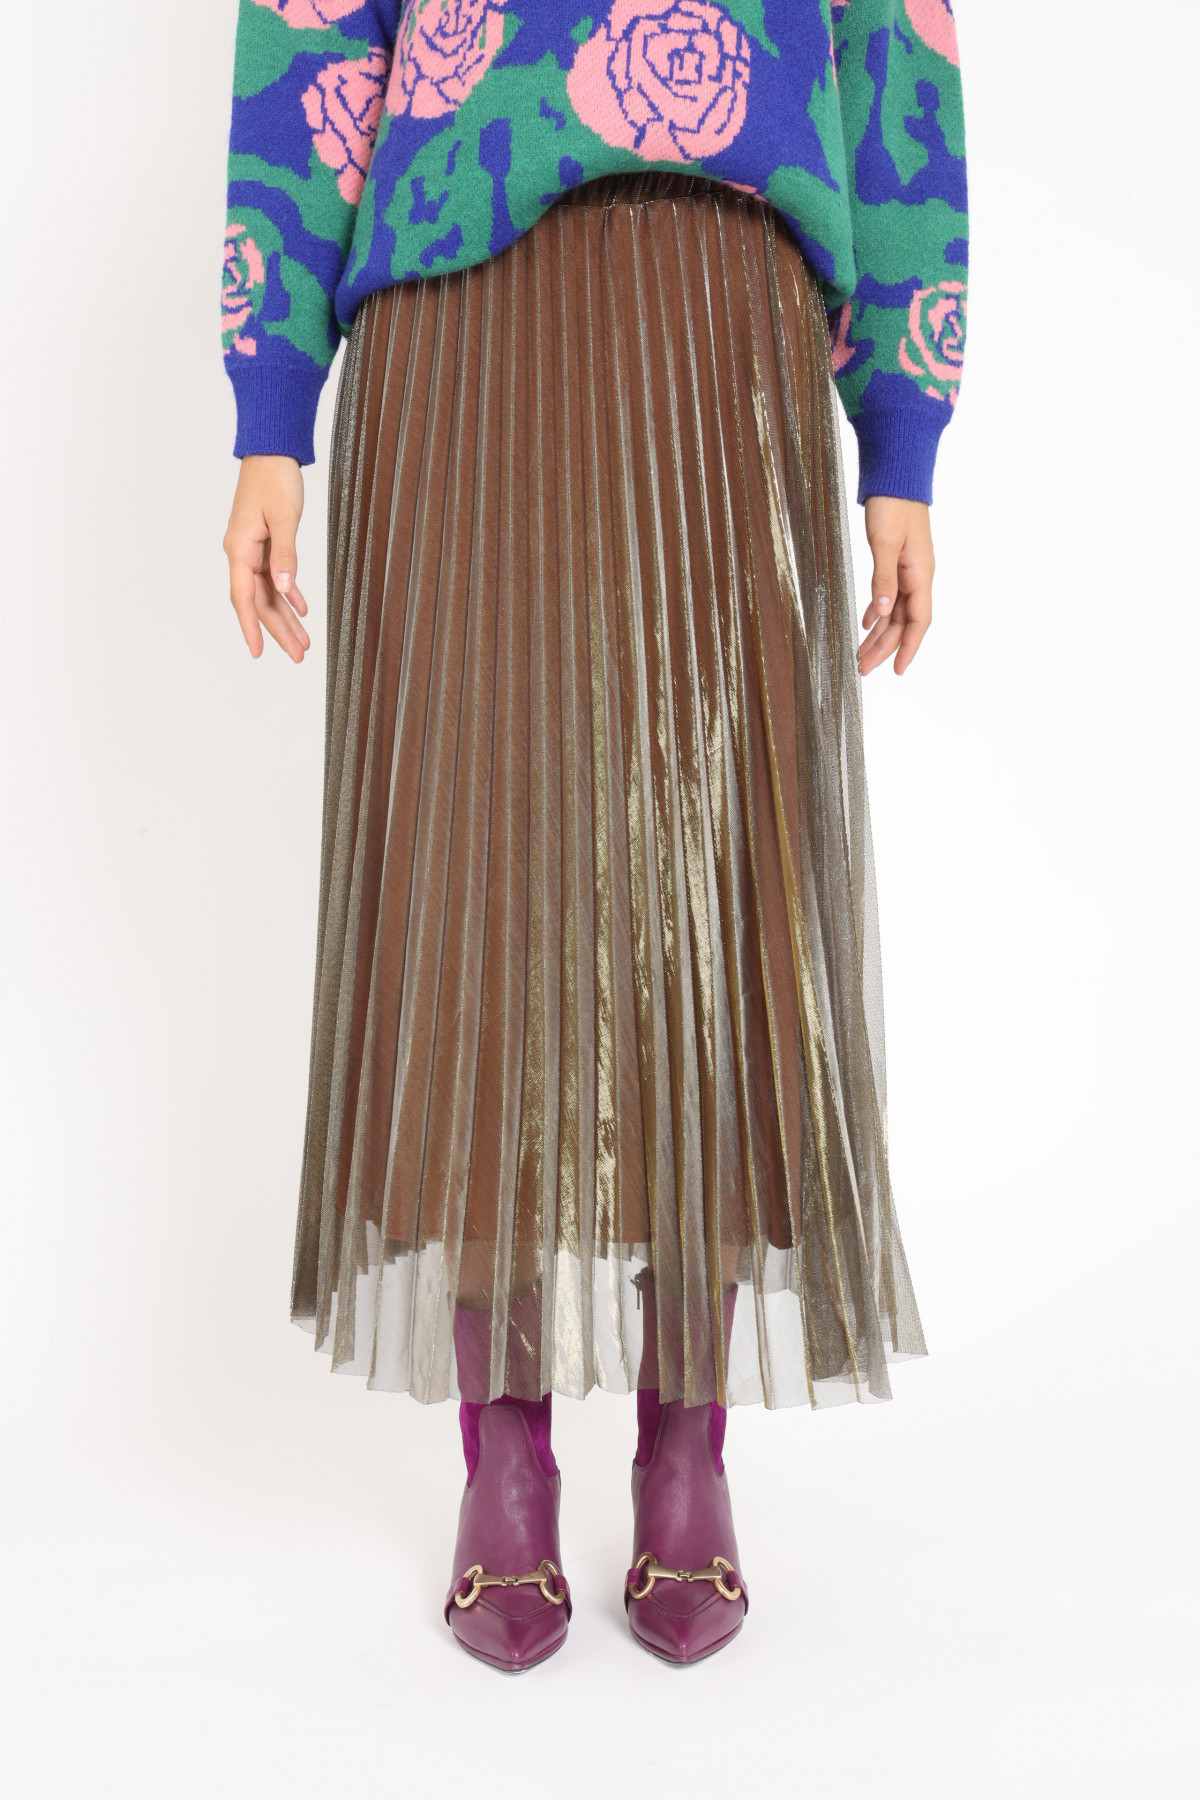 Pleated skirt in laminated tulle